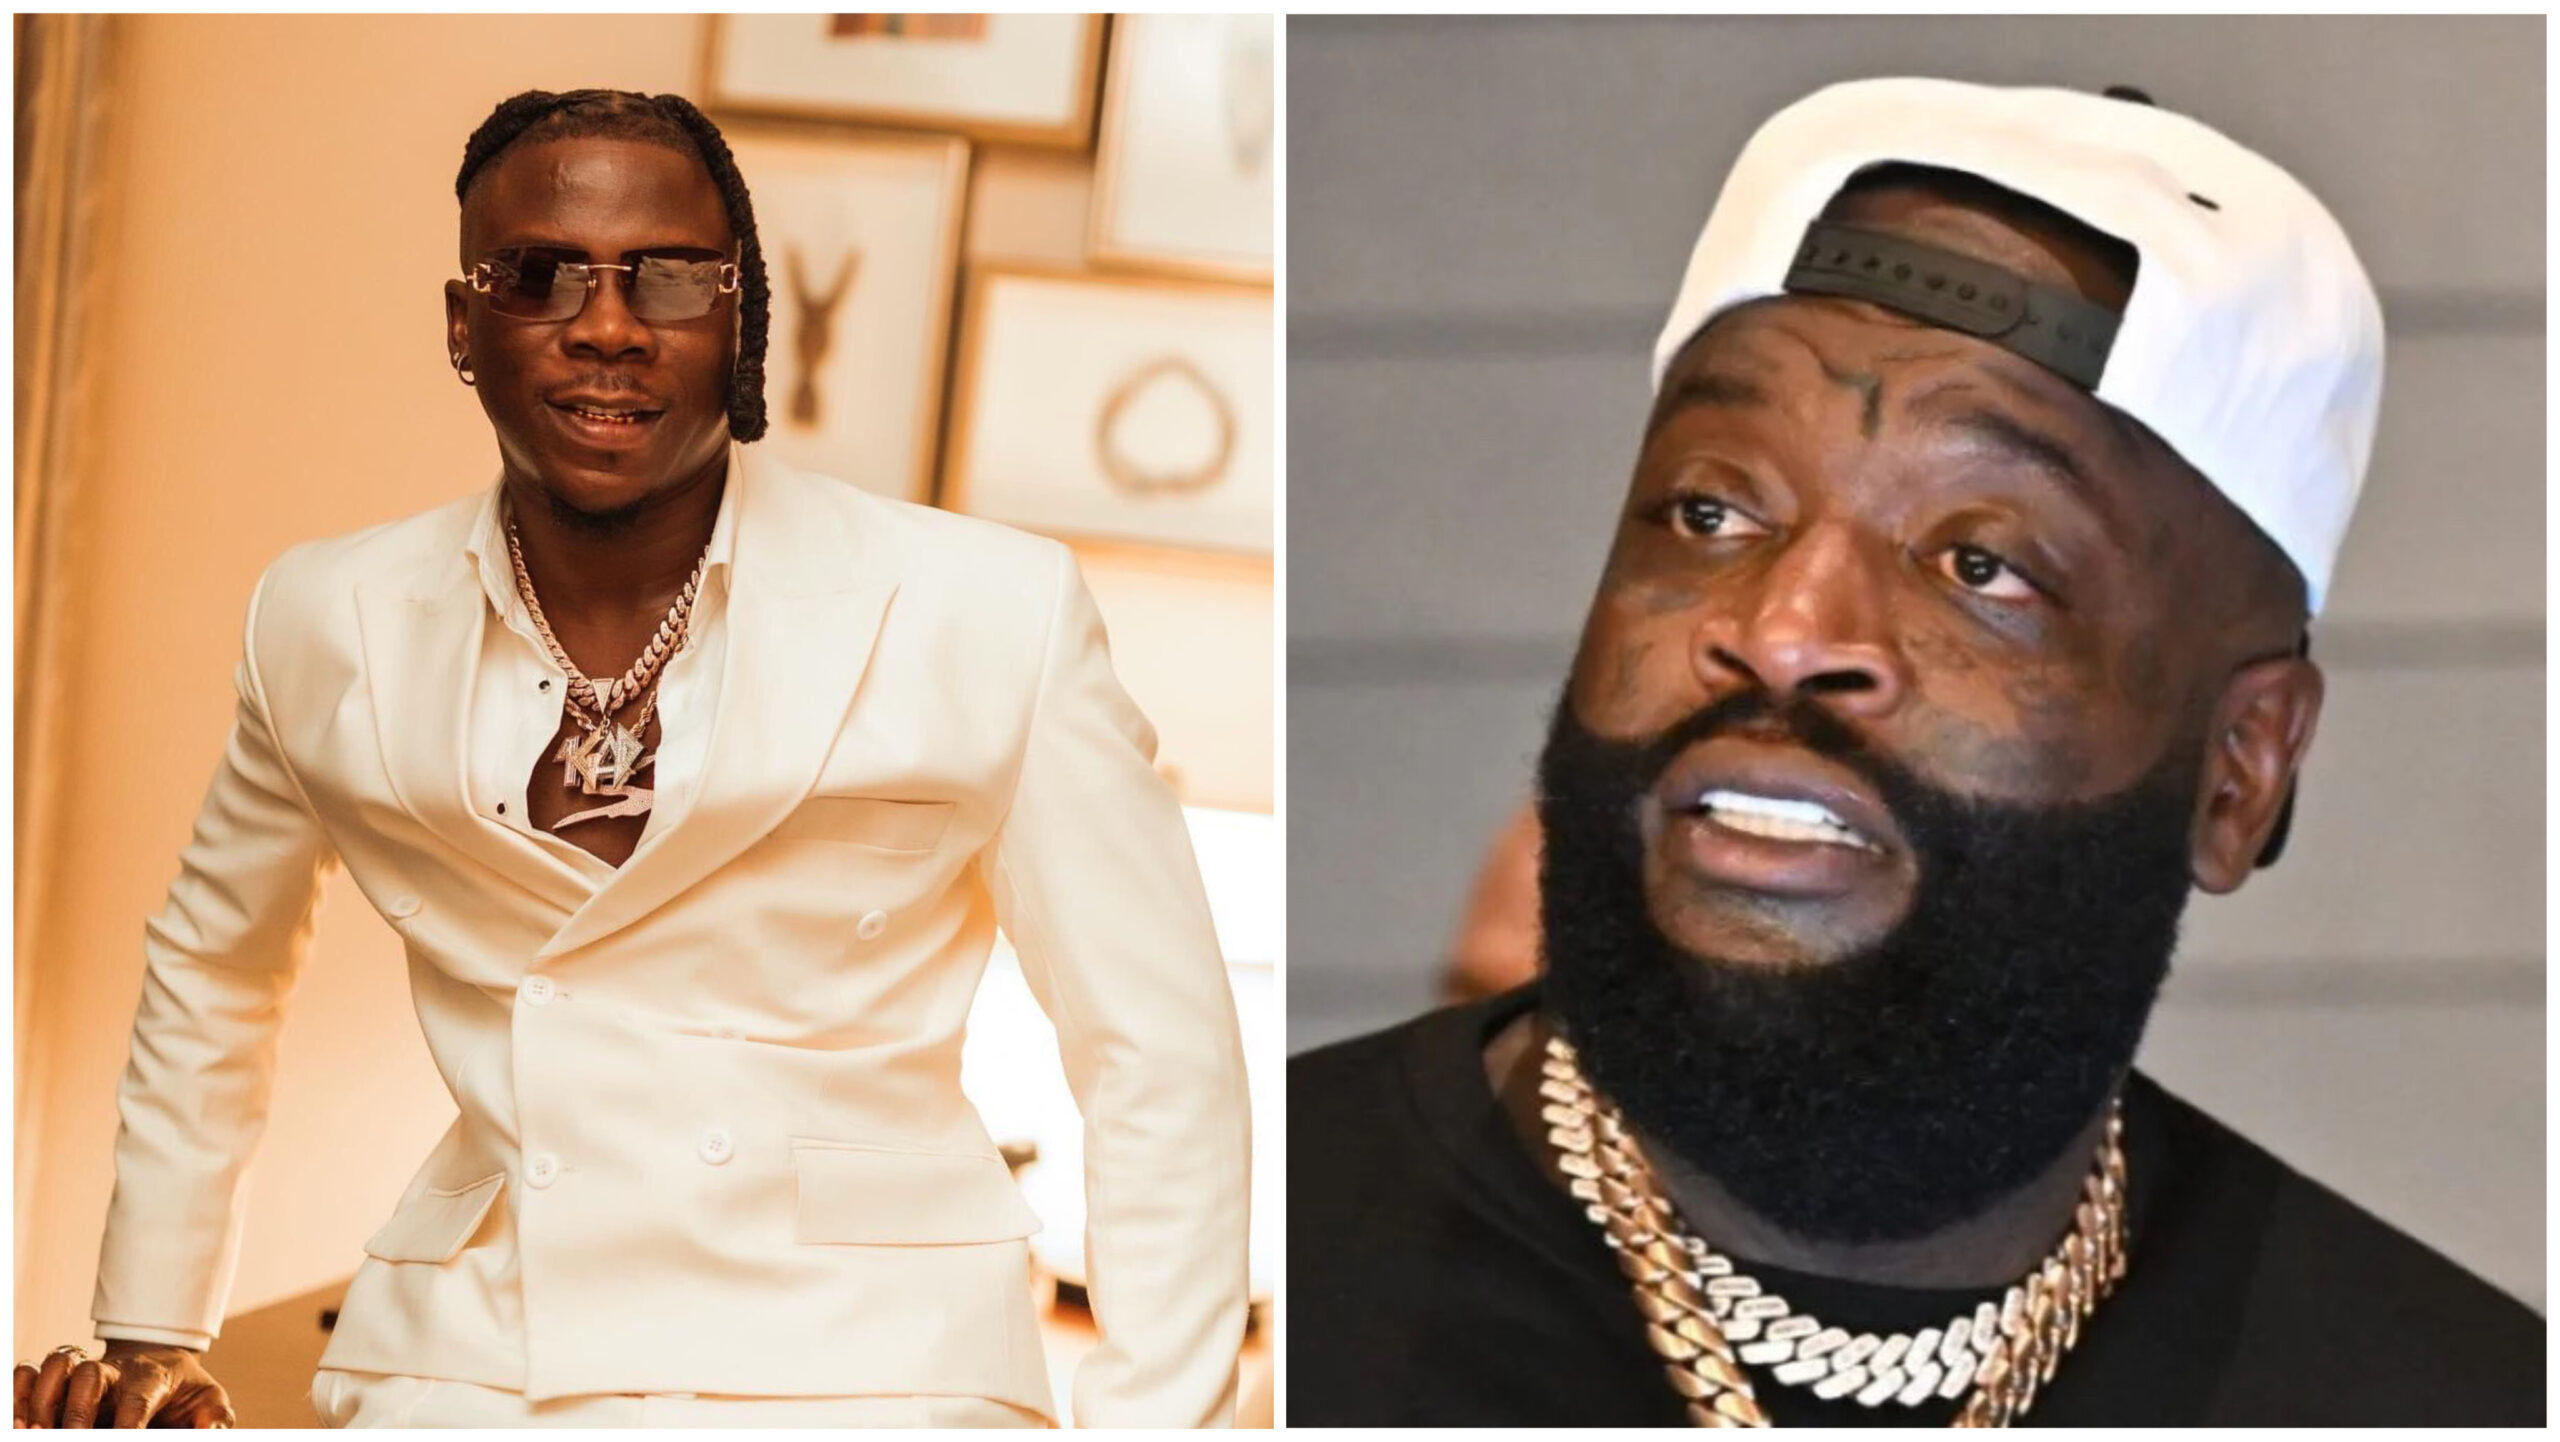 American rapper Rick Ross to link Stonebwoy to Rihanna for collaboration this week